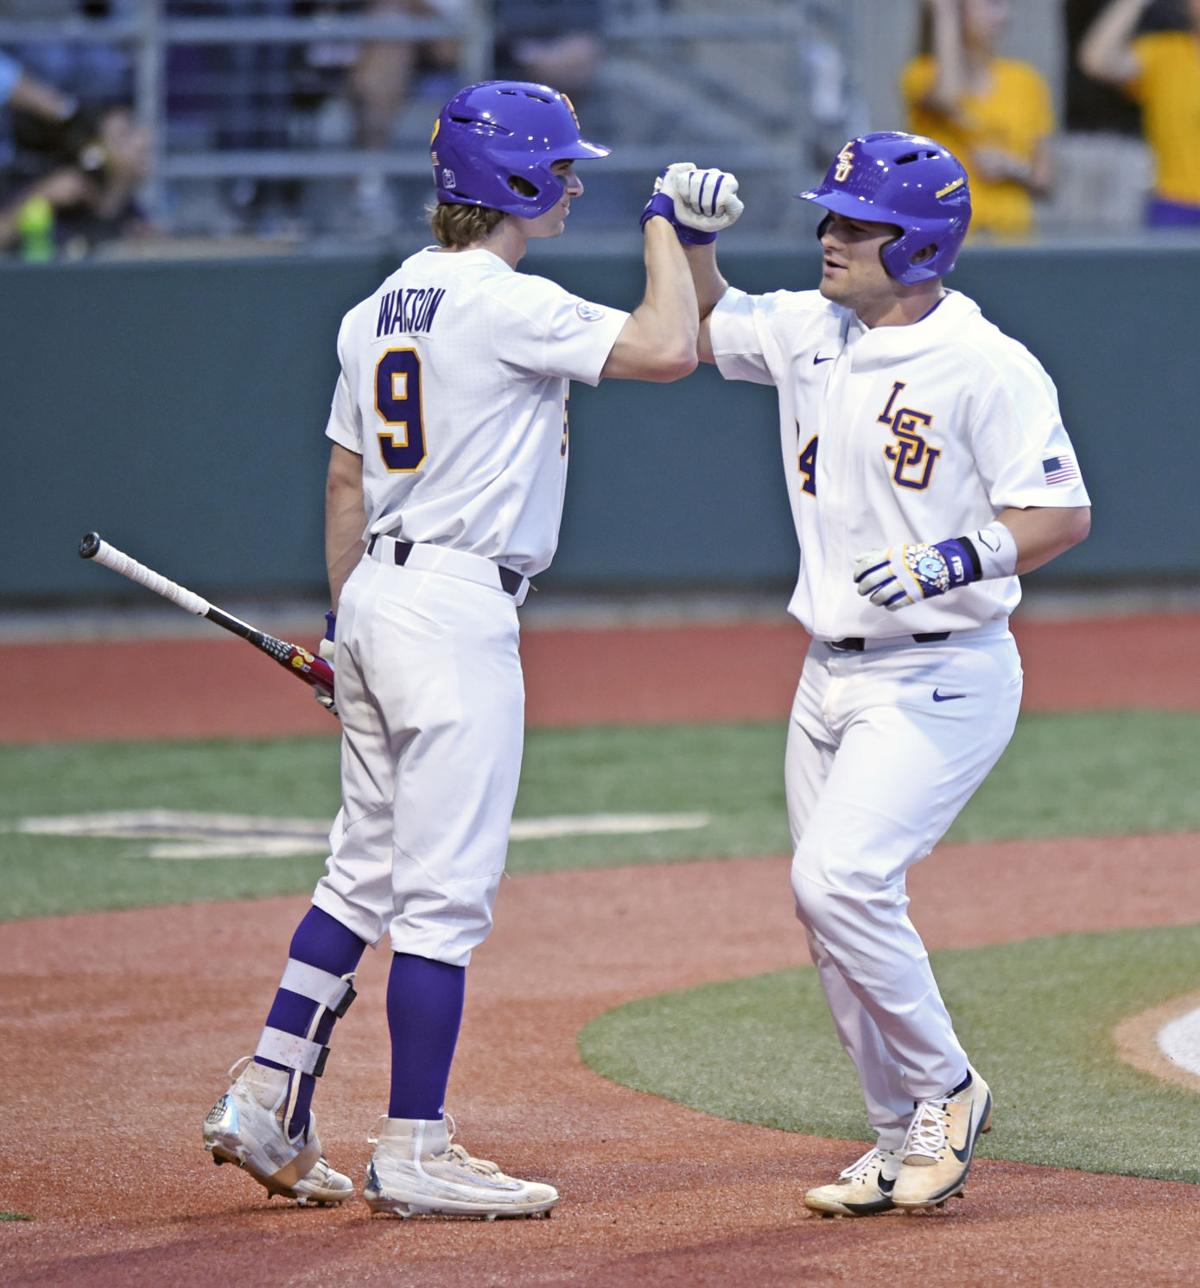 LSU baseball in the rankings Tigers (mostly) on the rise after an